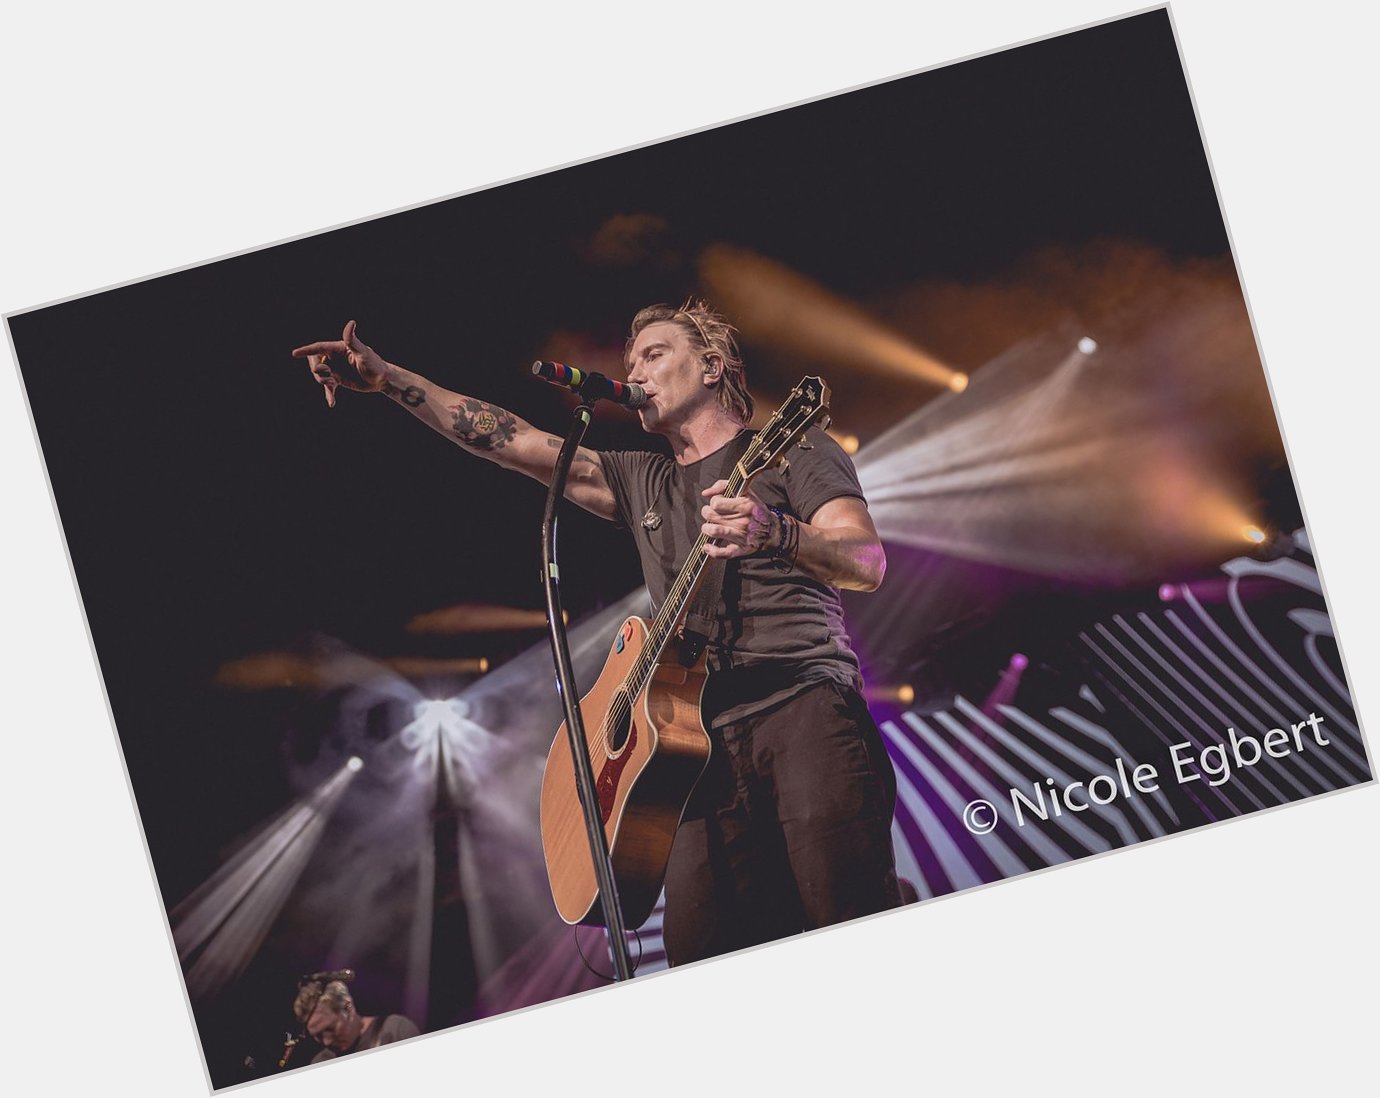 Happy birthday to Johnny Rzeznik of We hope to have you back in Cincy soon Photo by 